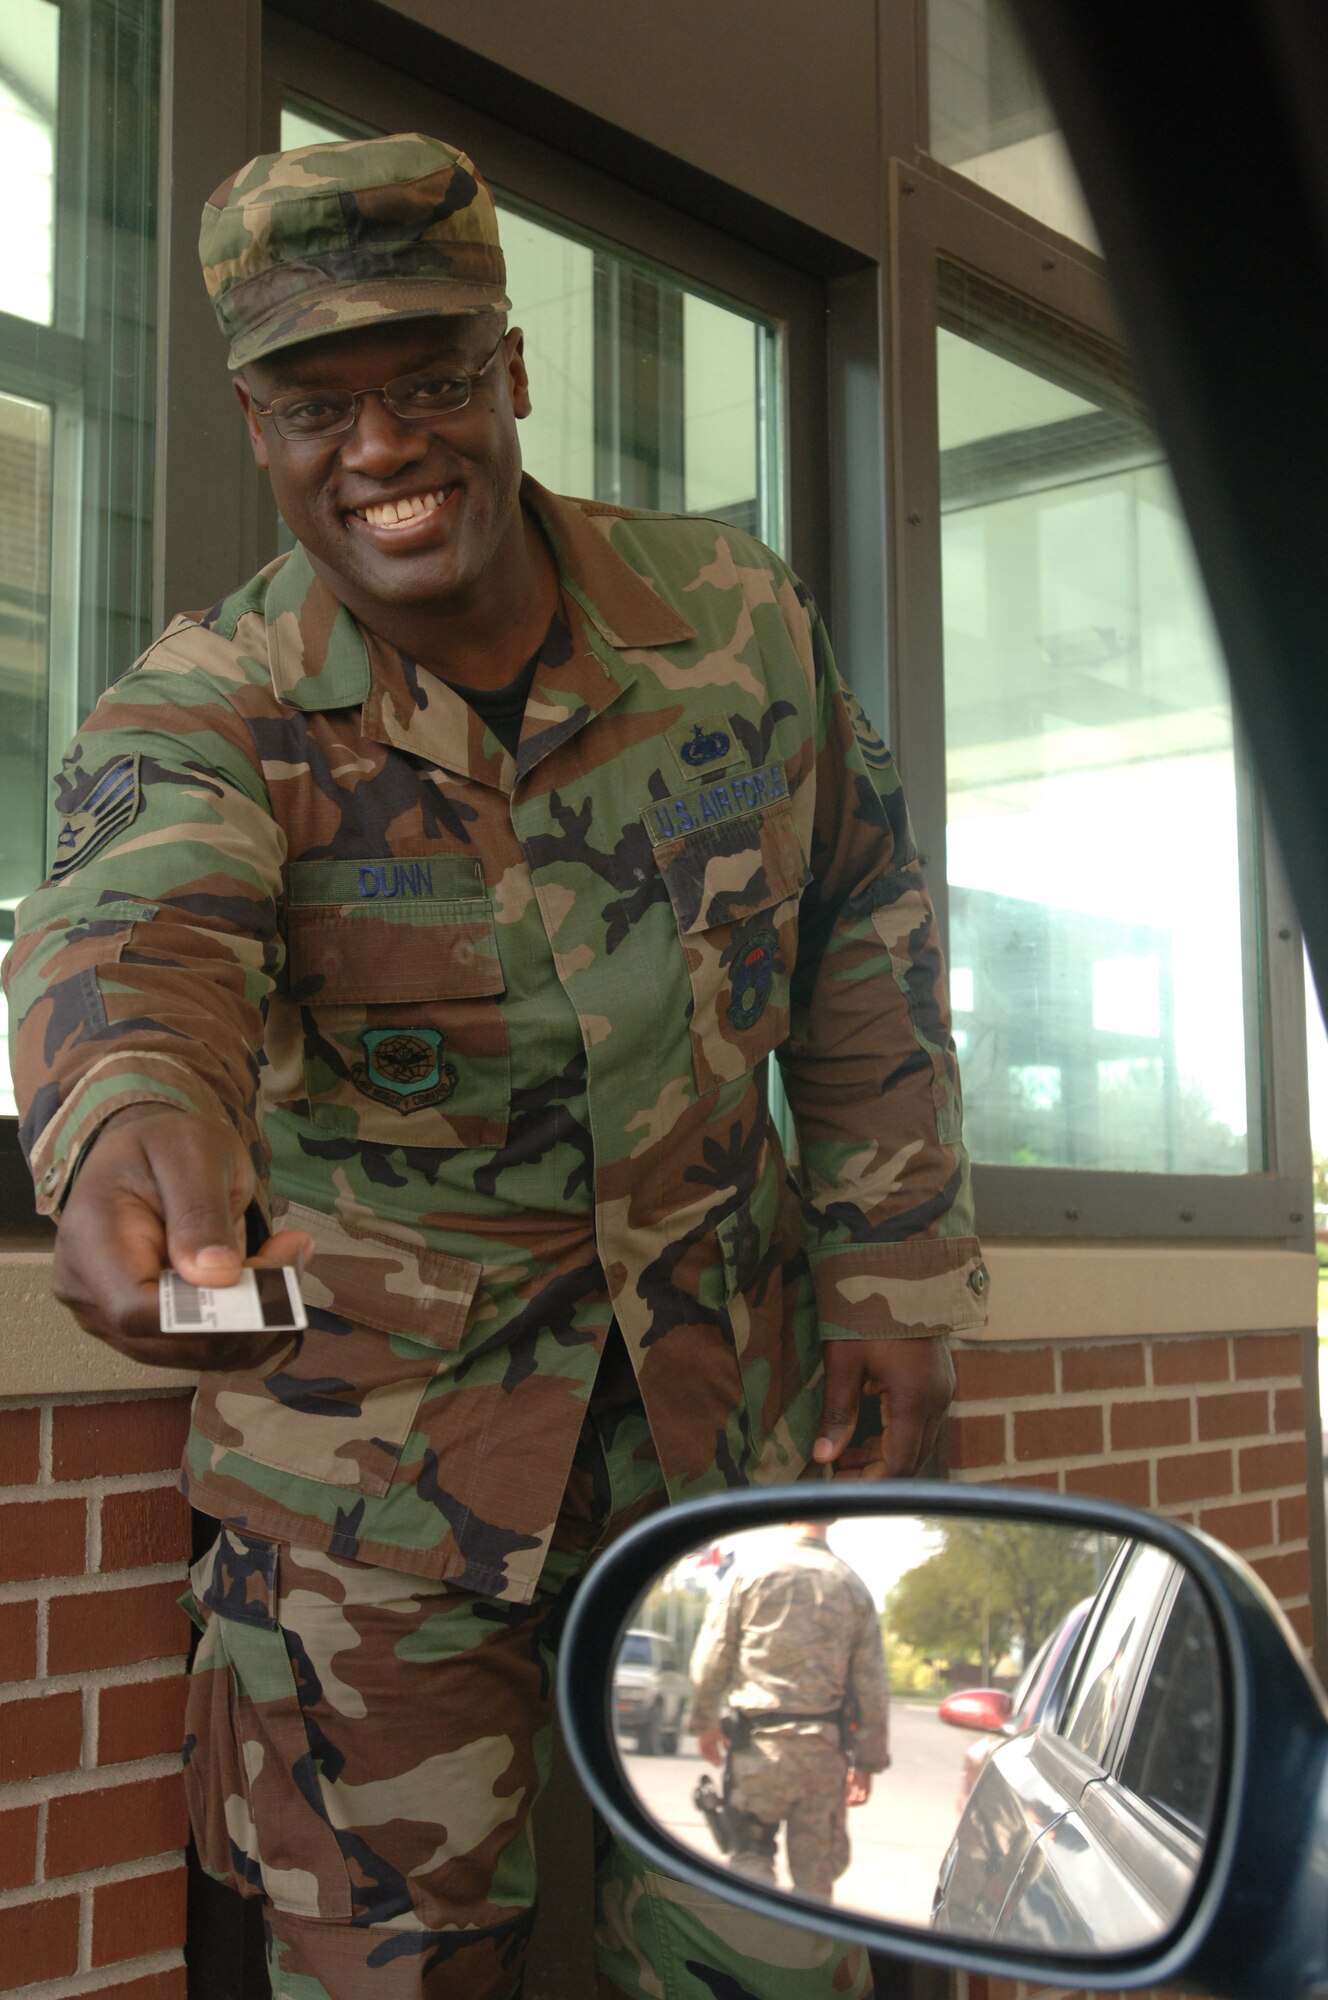 Tech. Sgt. Stefan Dunn, an Air Force Reservist from March AFB, Calif., on temporary duty as an augmentee with the 319th Security Forces Squadron, Grand Forks AFB, N.D. shows his locally famous dazzling smile as he returns an ID card during duty at the front gate.  The Bessemer, Ala. native sees duty here as a great opportunity to serve his country and has been recognized as one of the wing's best by the local community and wing leaders. (U.S. Air Force photo/Tech. Sgt. Joseph Kapinos)